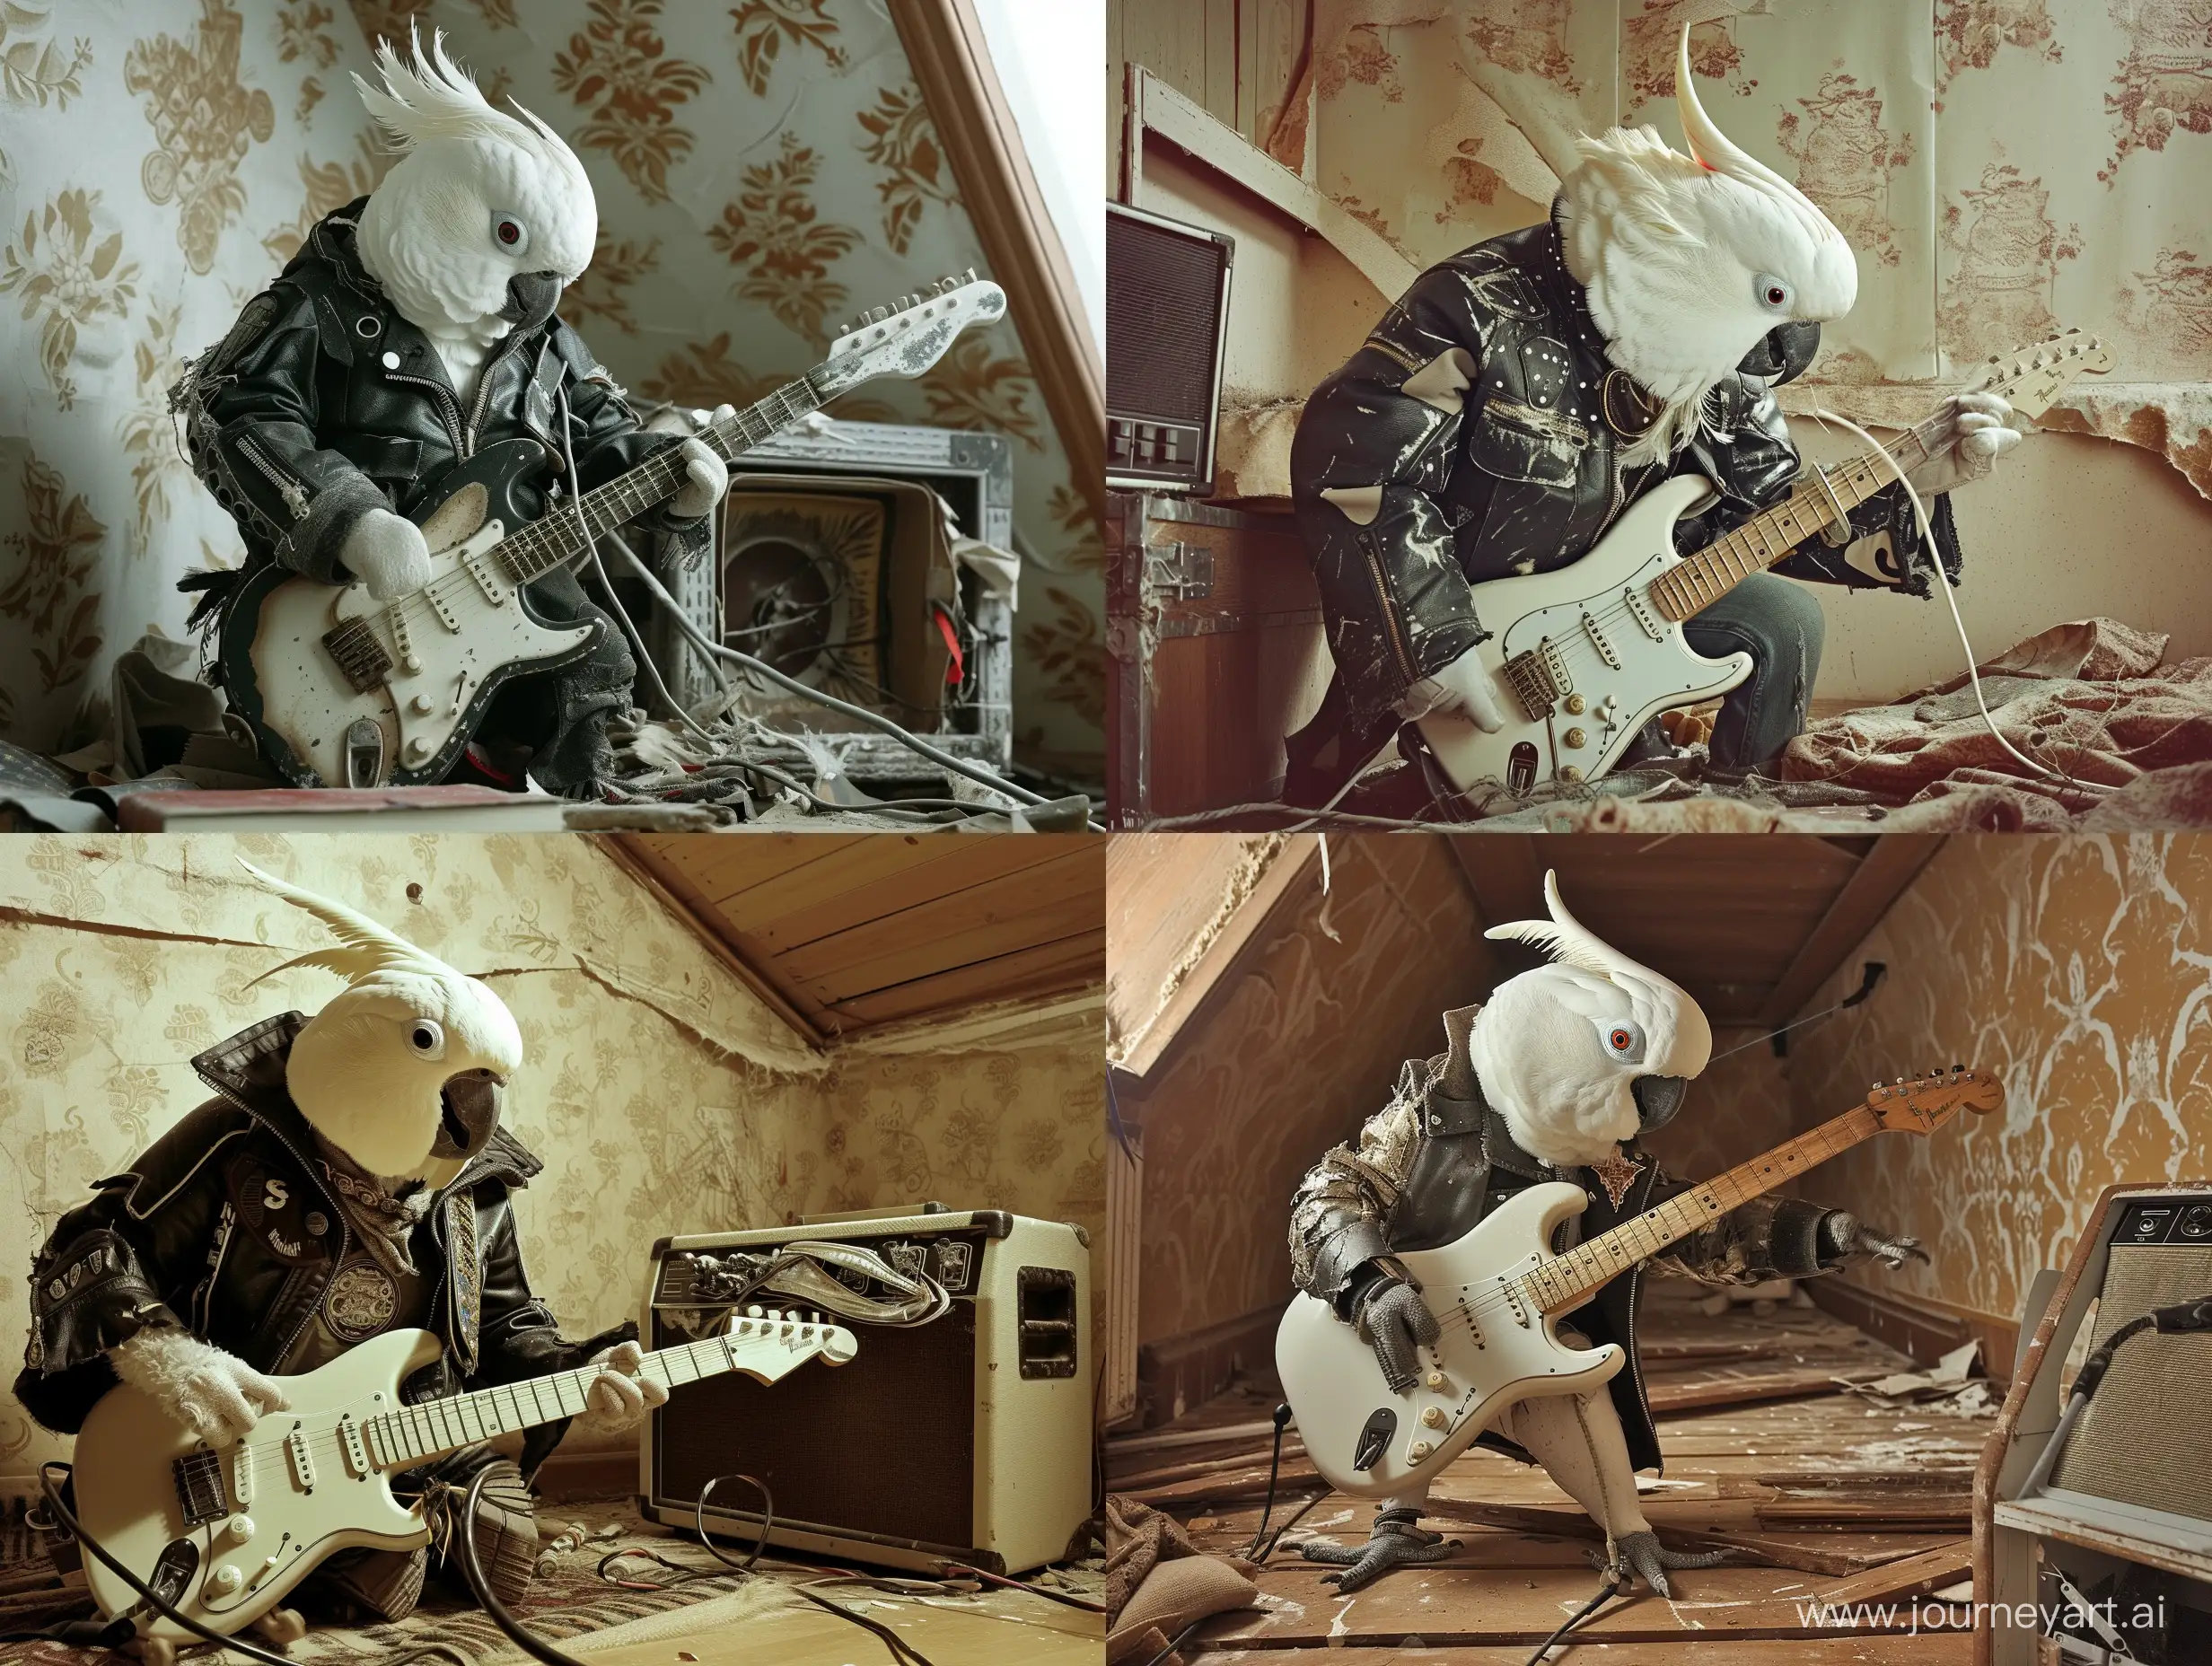 Funny-White-Parrot-in-Biker-Jacket-Electrocuted-by-Guitar